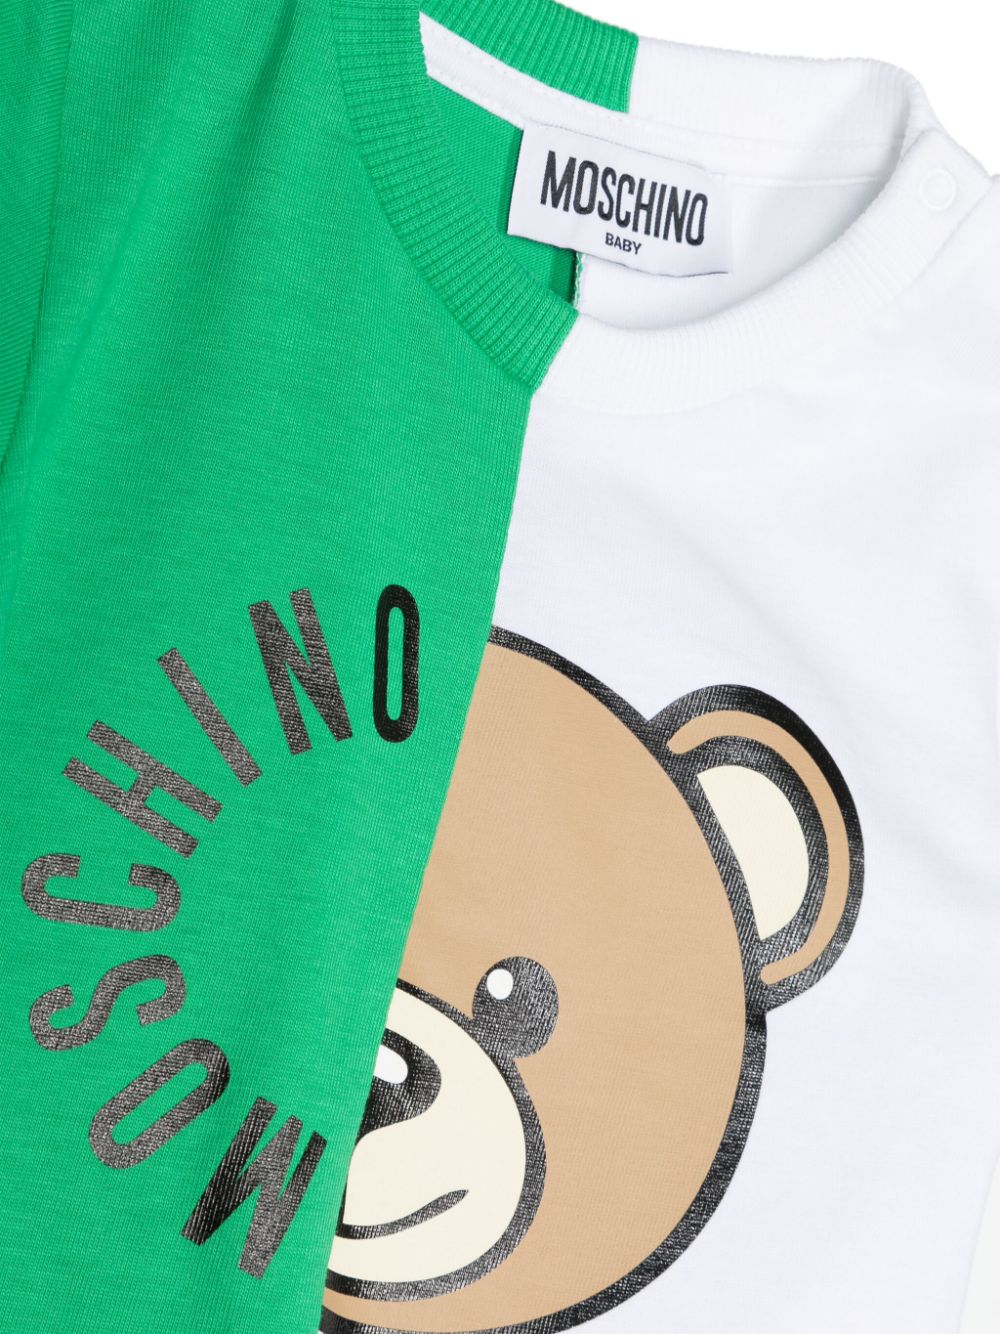 White and green baby t-shirt with logo